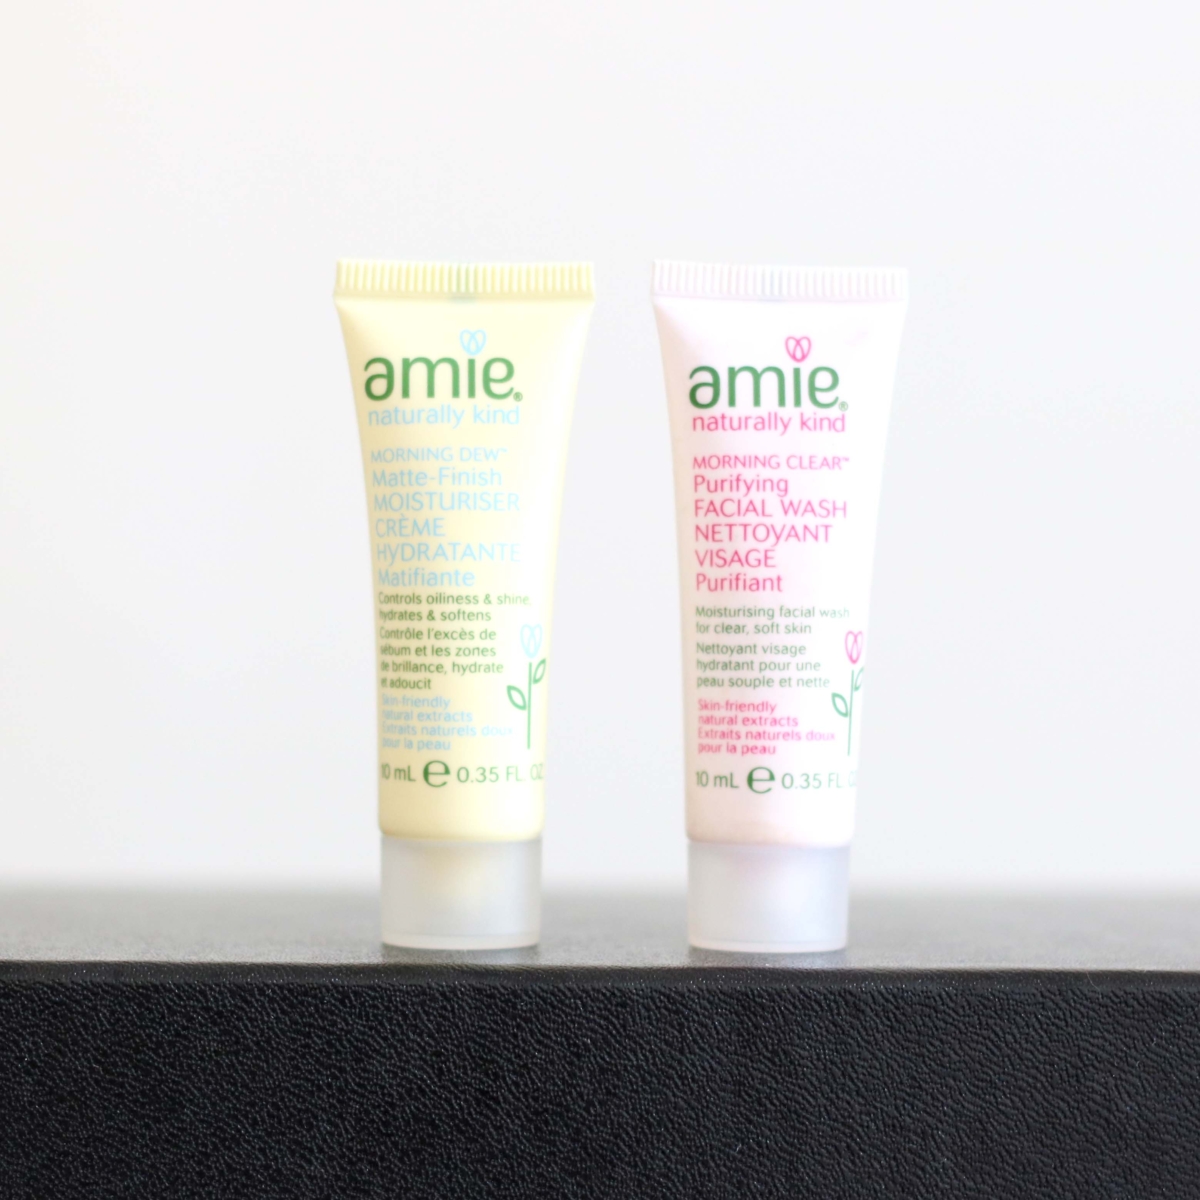 Latest in Beauty Build Your Own Box Review - Amie Morning Clean Facial Wash & Morning Dew Moisturiser Duo